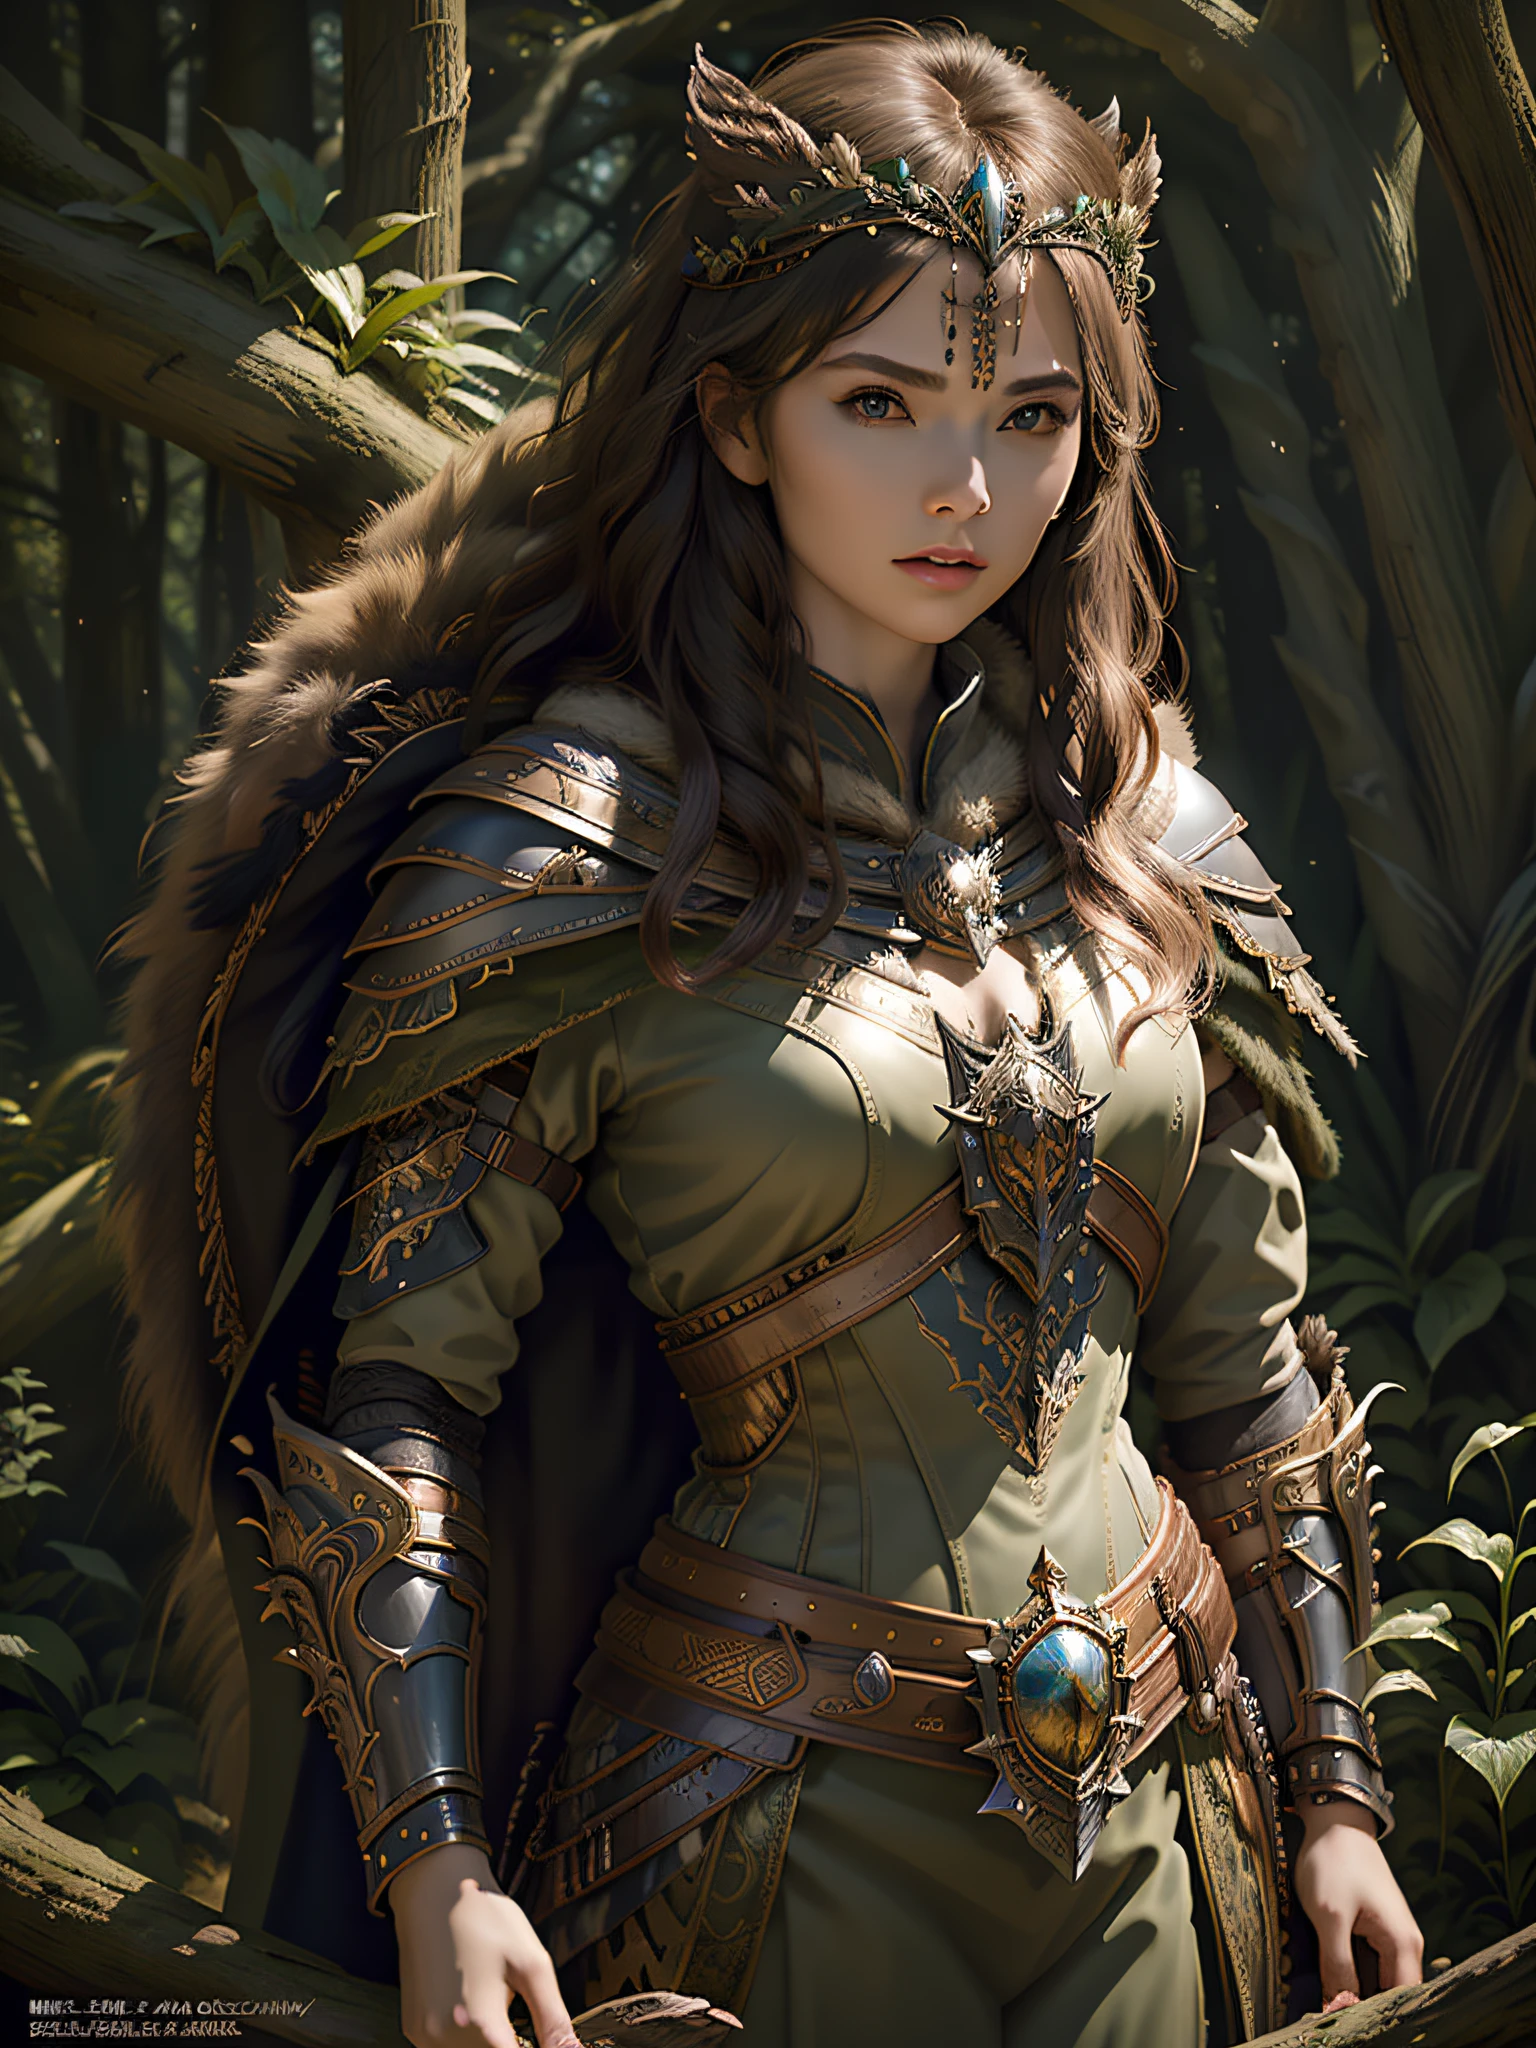 (Masterpiece, Top Quality, Top Quality, Official Art, Beautiful and Aesthetic: 1.2), (1 Girl), (Warrior Queen Armor, Fur-Lined Cape, Bejeweled Crown: 1.2), Serious, Black Hair, Big, Ultimate